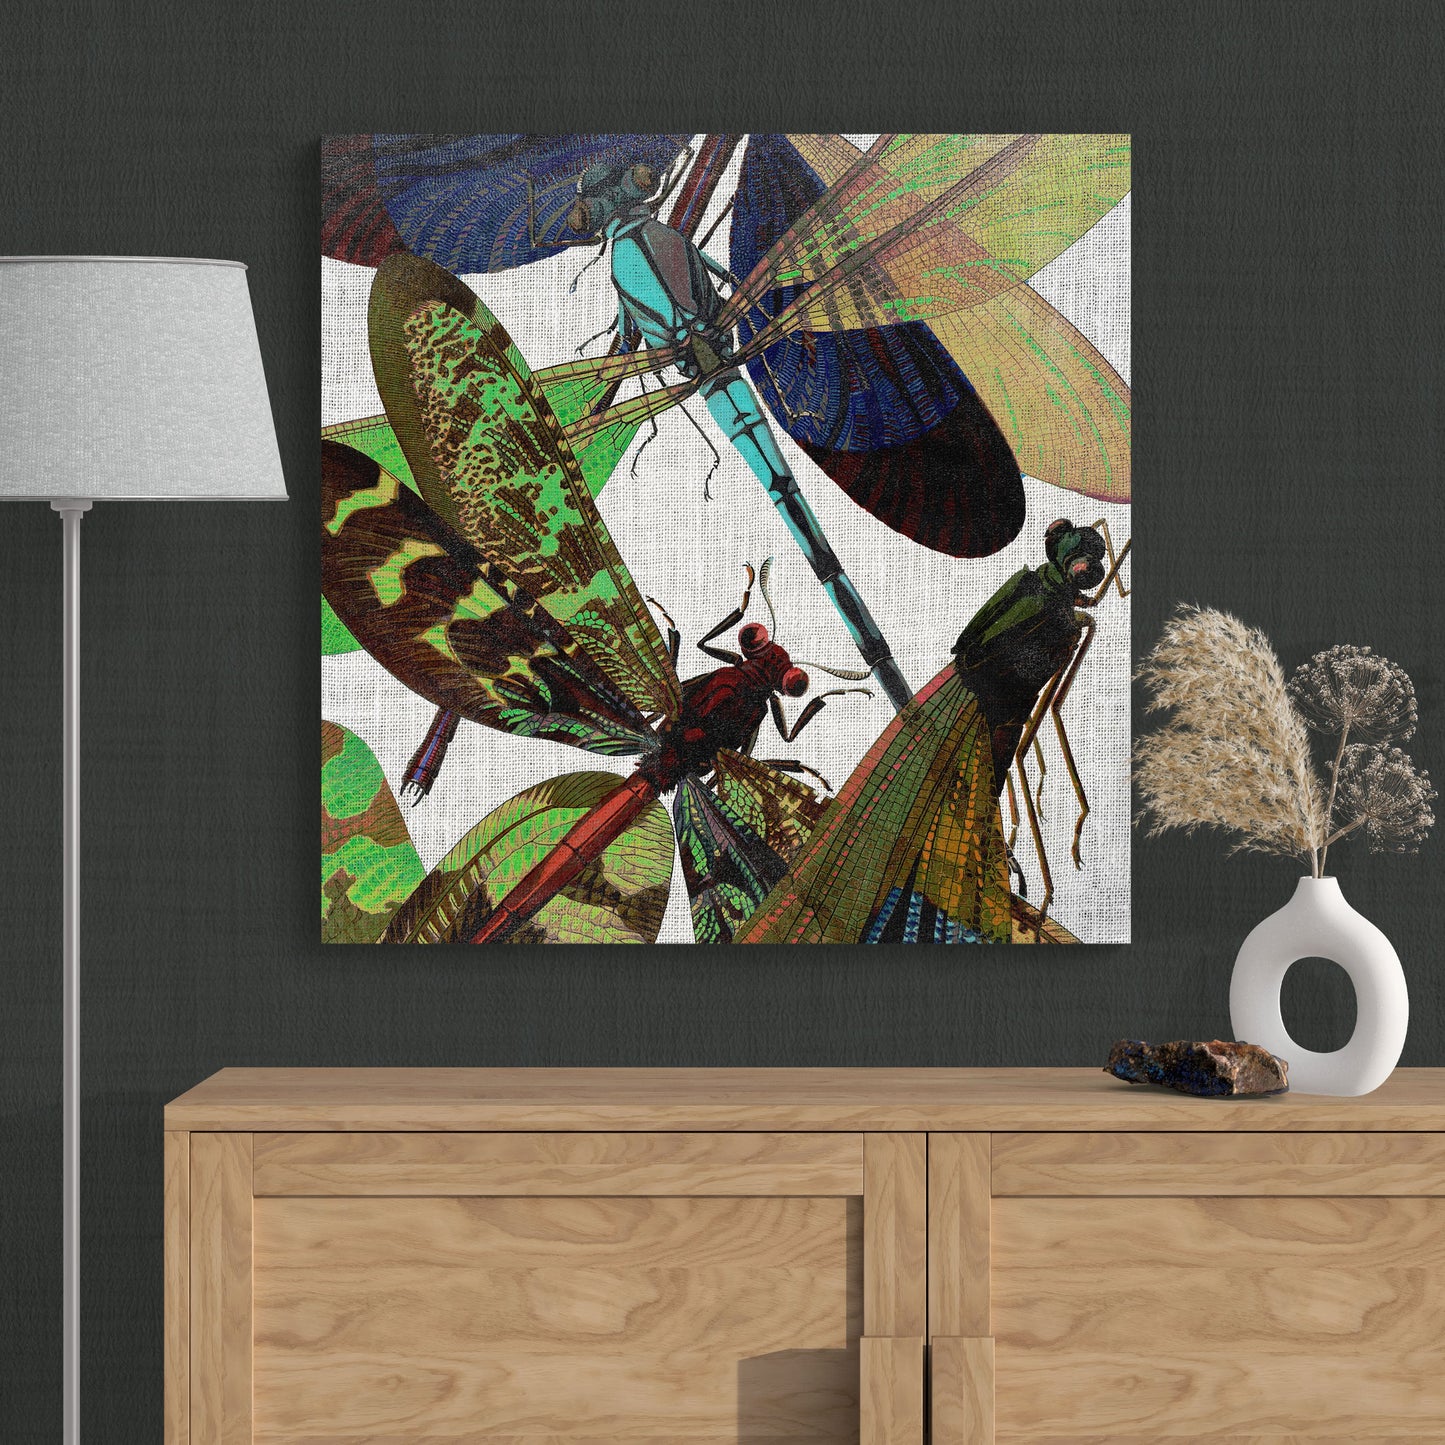 Abstract Insects Damselfly Collage 2 - Colorful Nature Canvas Wall Art - Retro Reverence